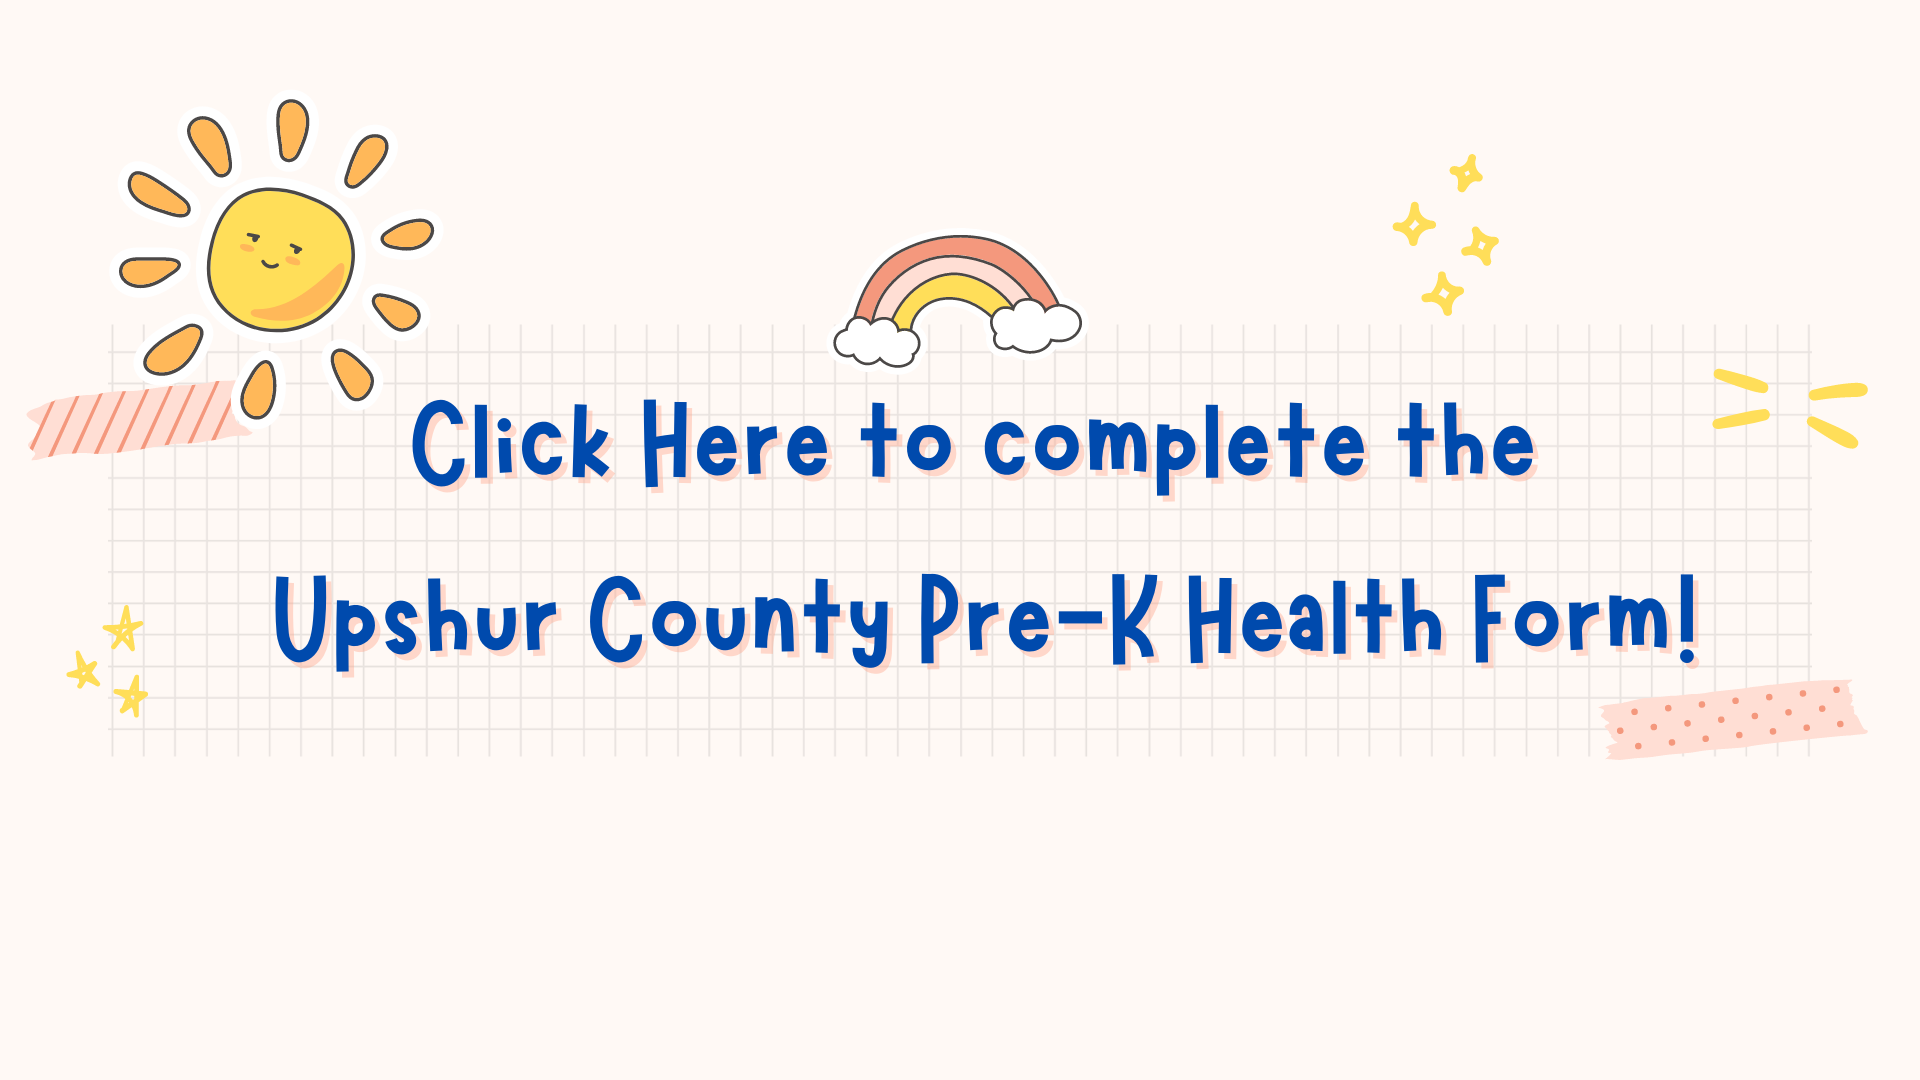 Click here to complete the Upshur County Pre-K Health Form